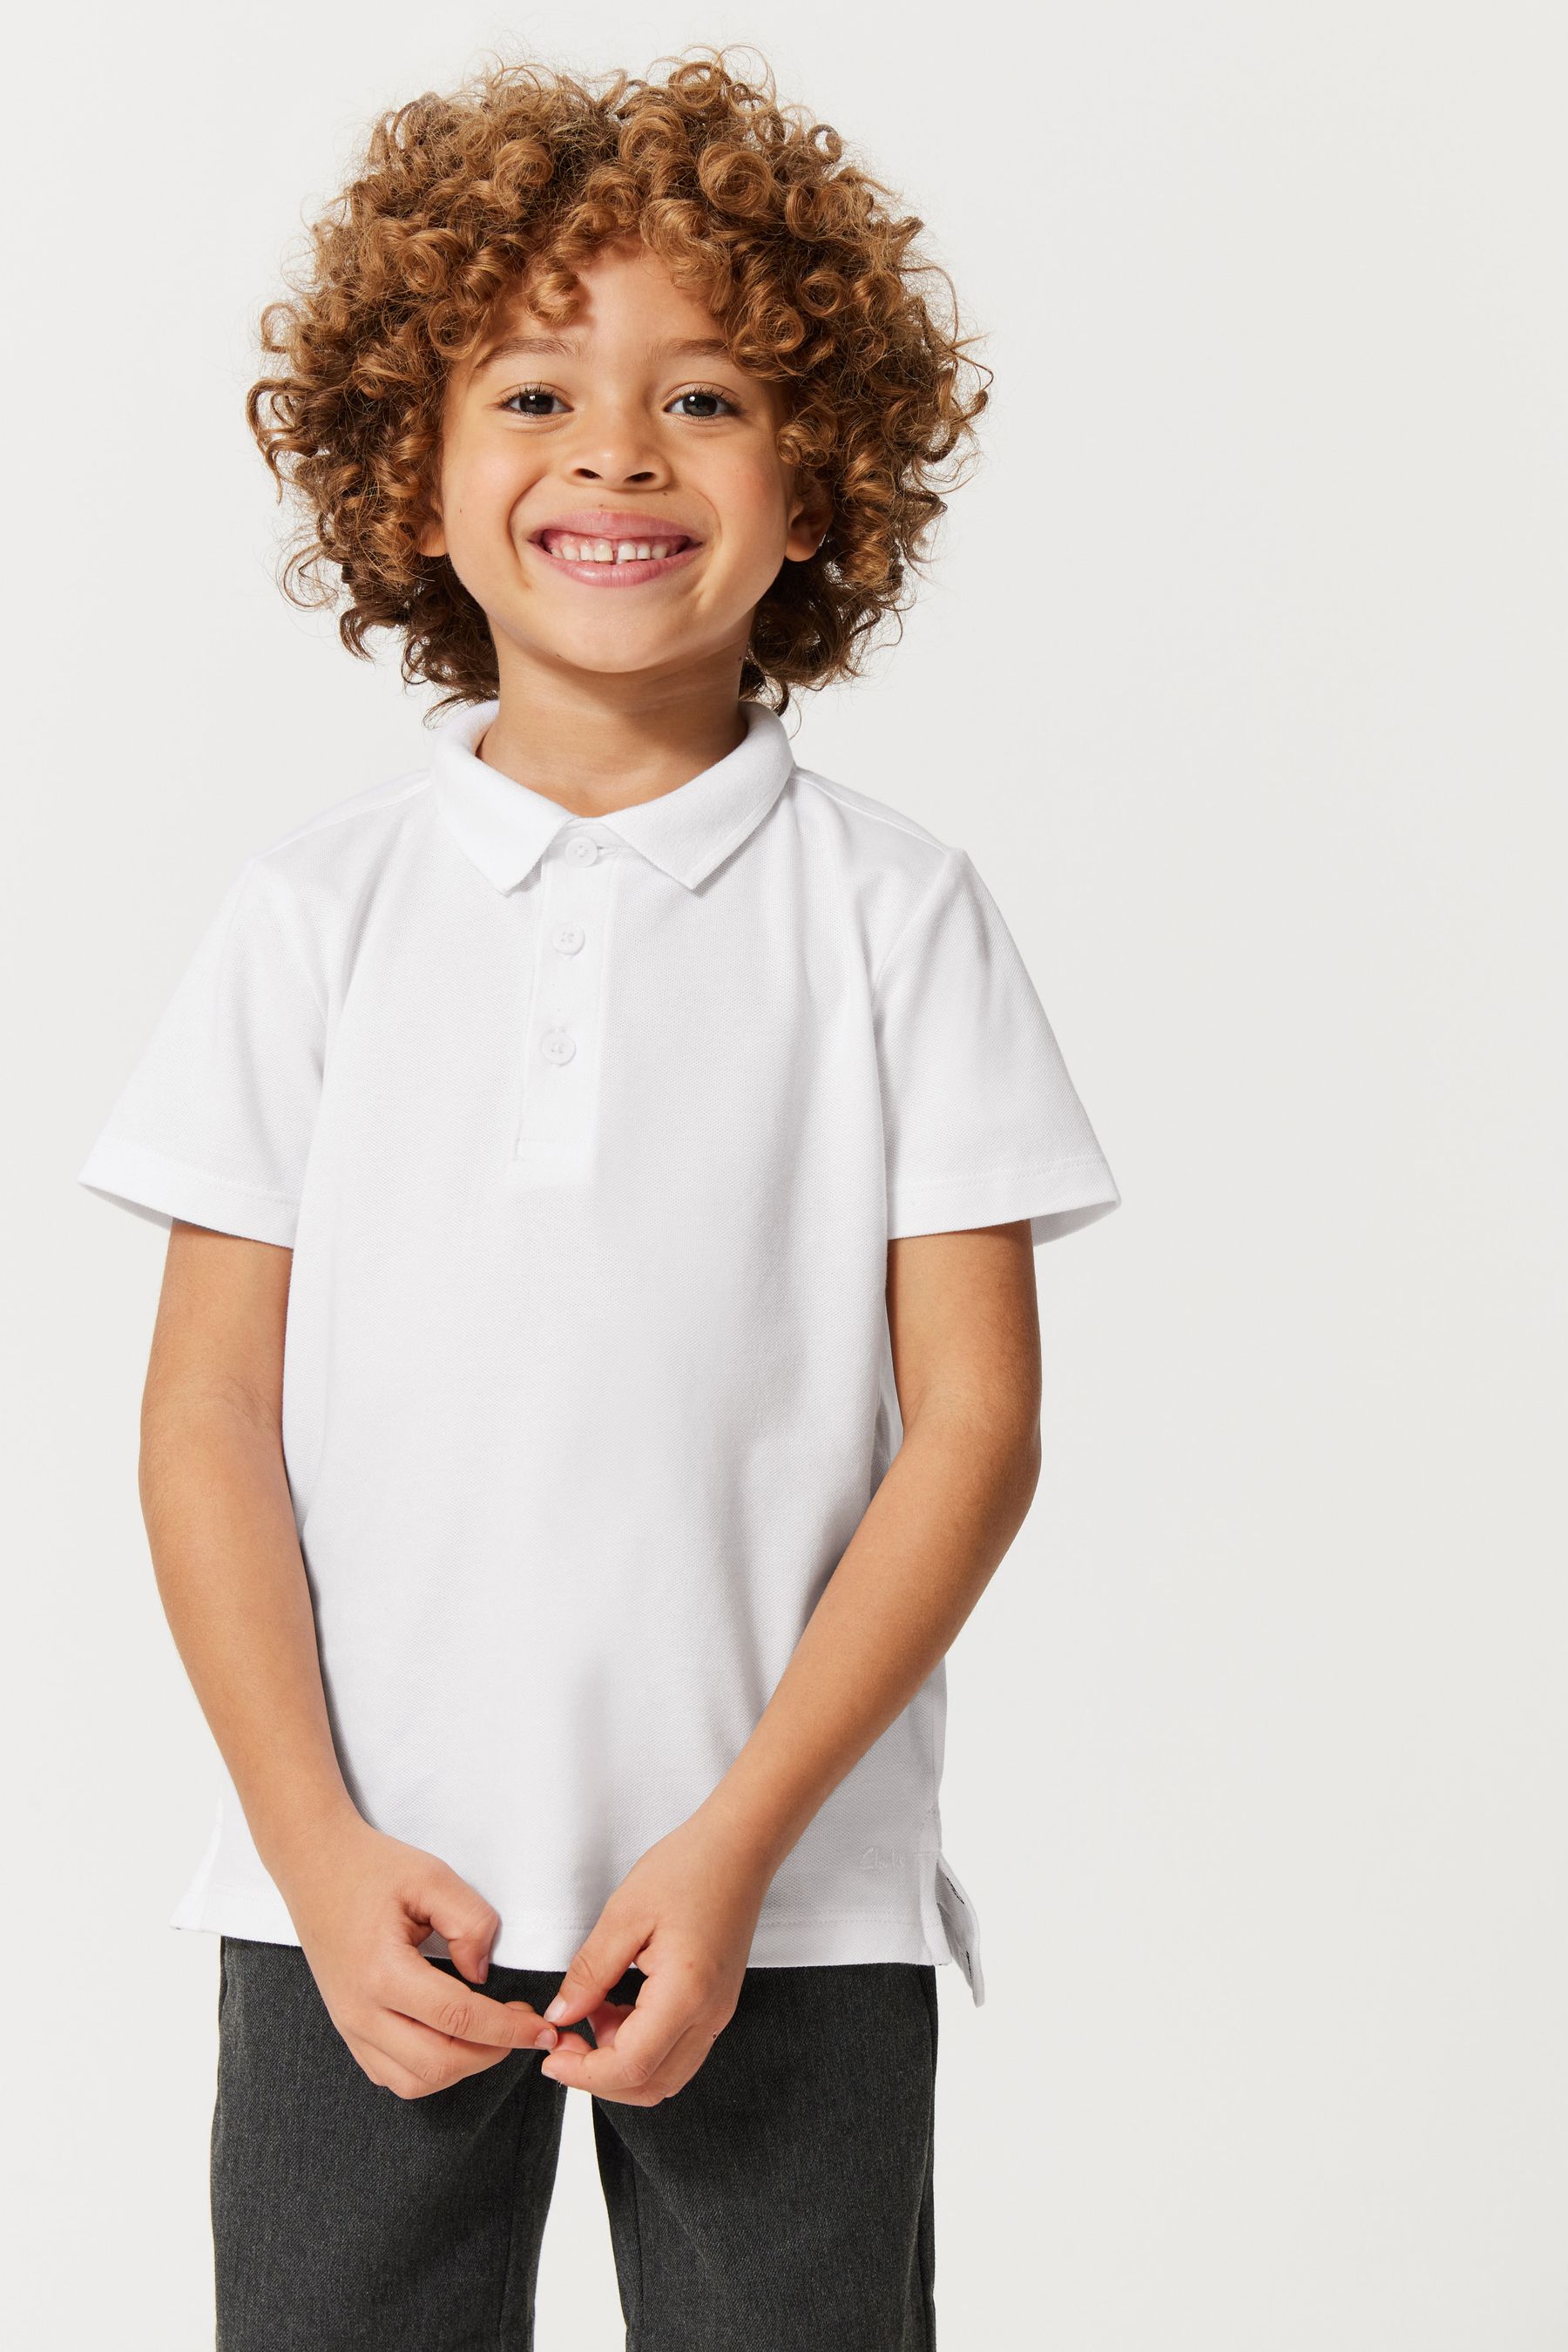 Buy Clarks White School Short Sleeve Boys Polo Shirts 2 Pack from the ...